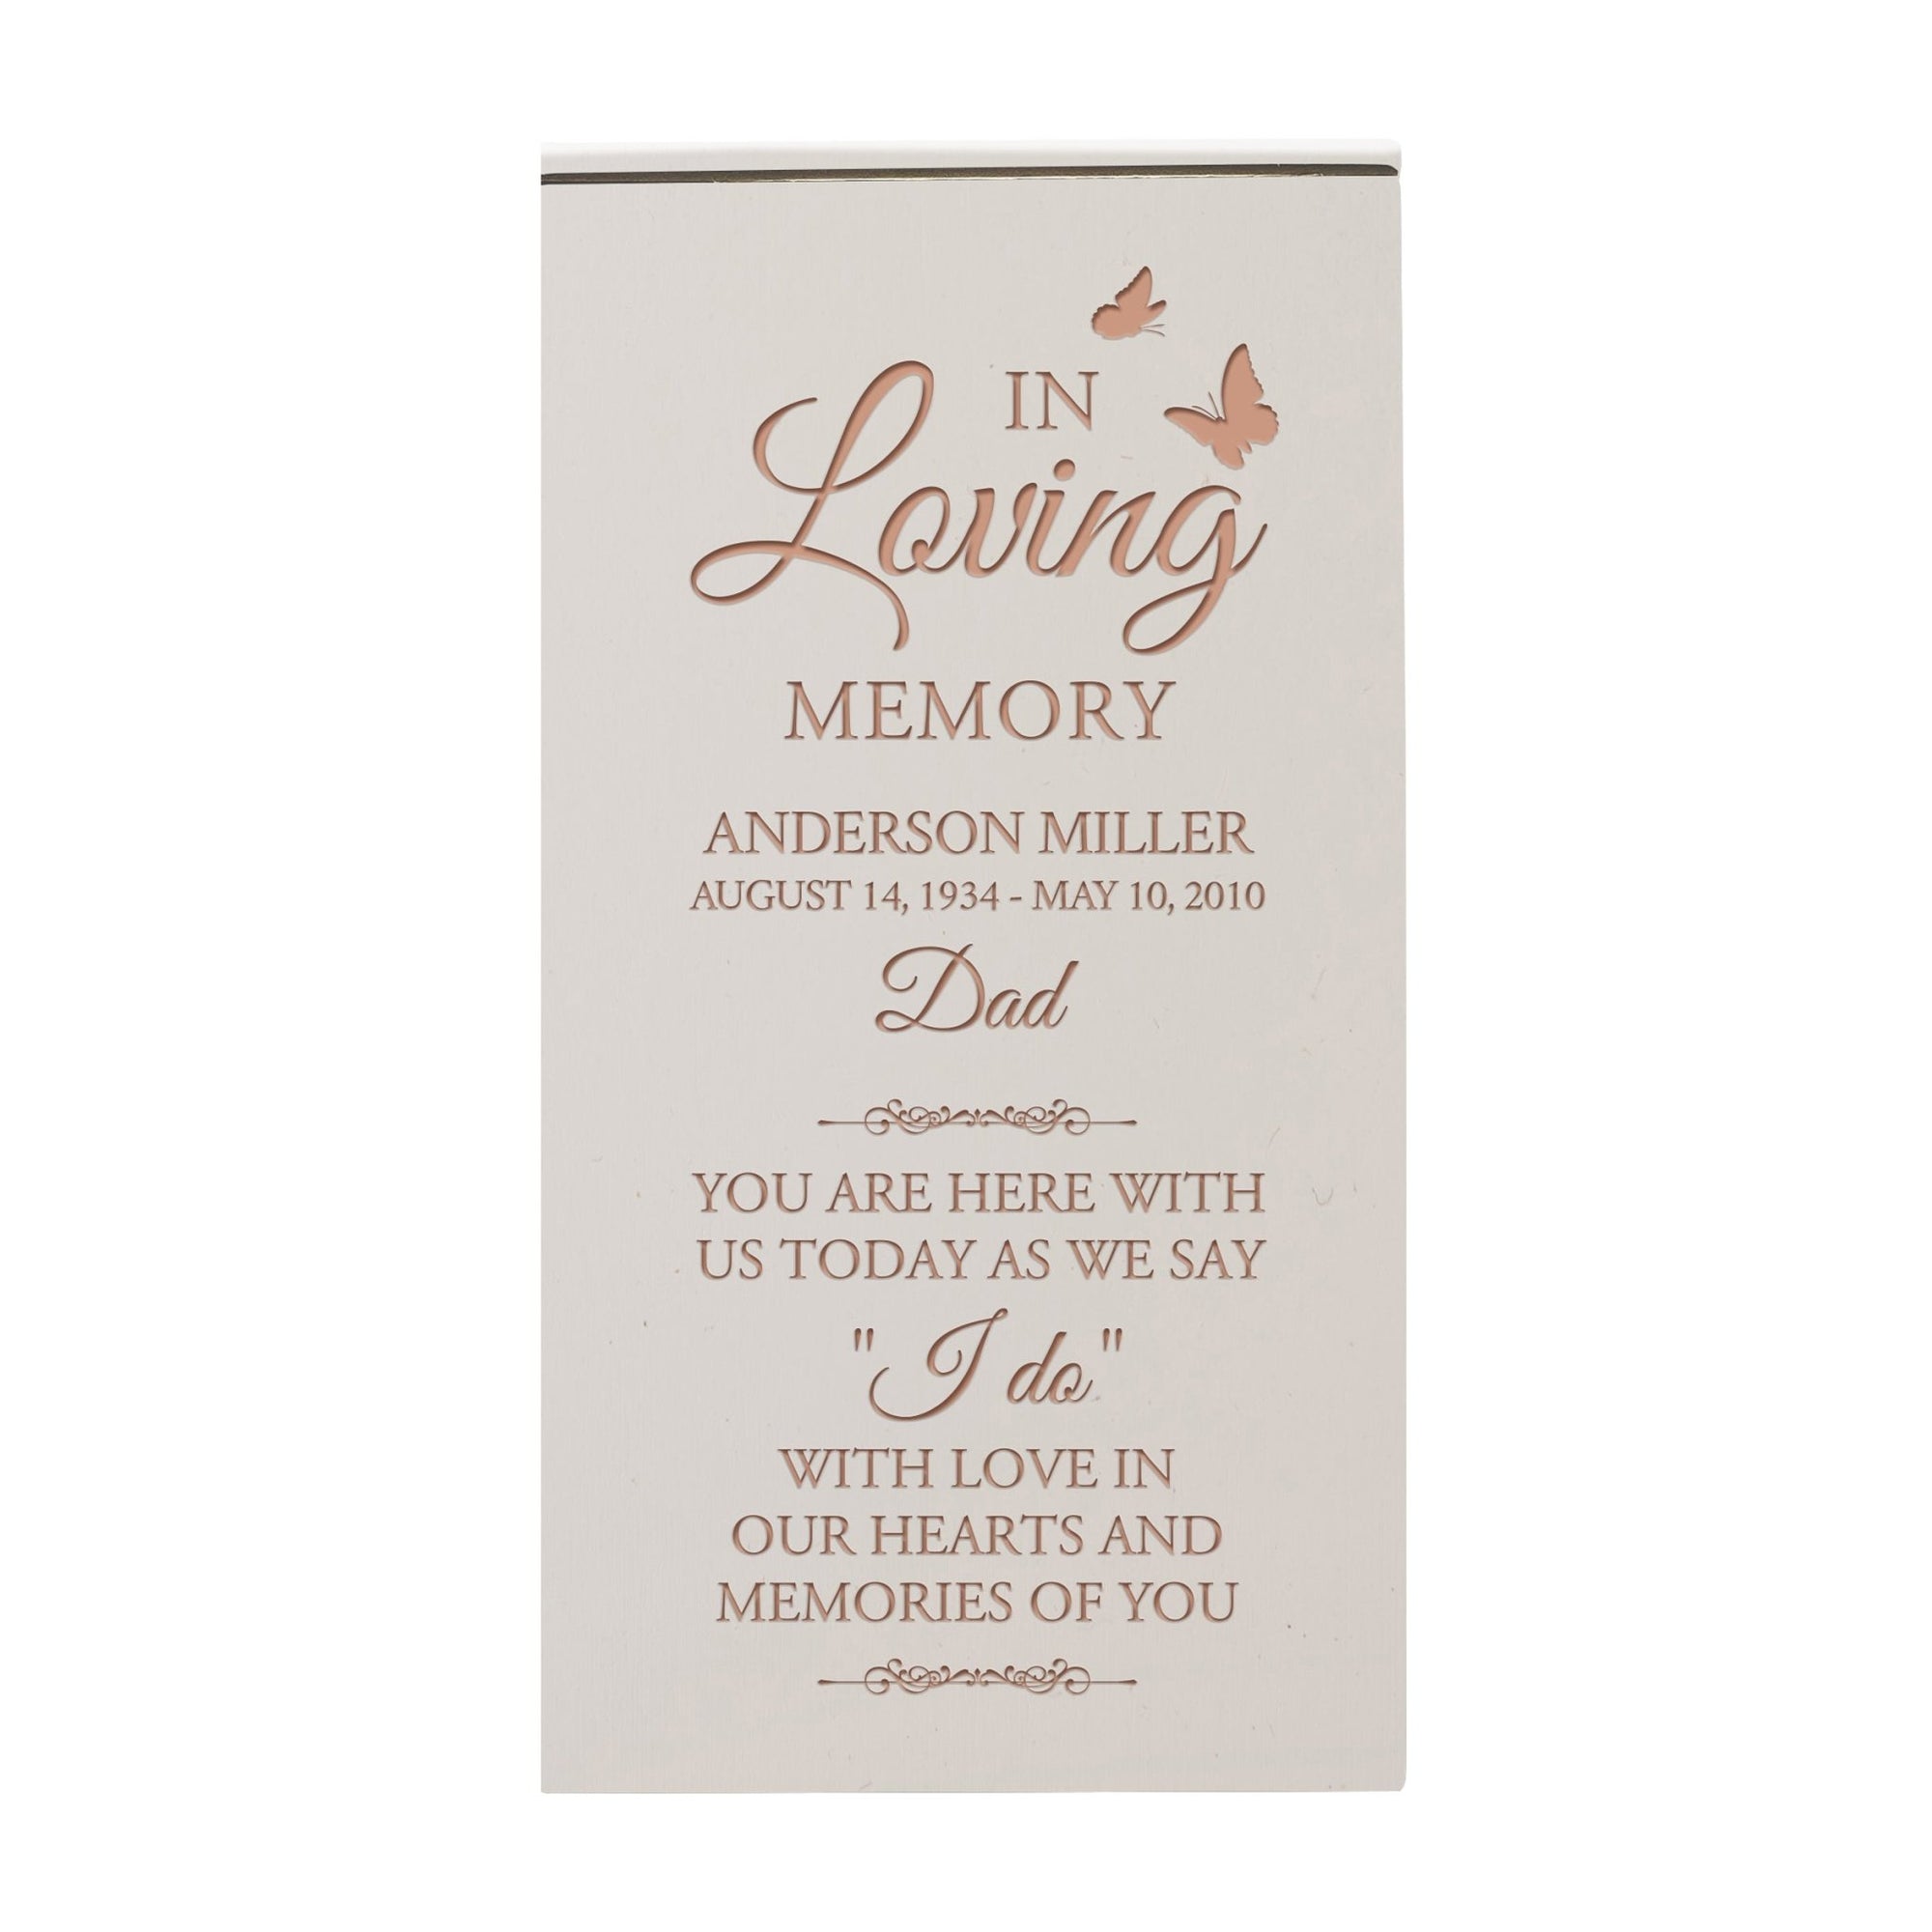 Custom Engraved Memorial Keepsake Urn Box holds 100 cu in of Ashes In Loving Memory - Dad, You Are Here - LifeSong Milestones